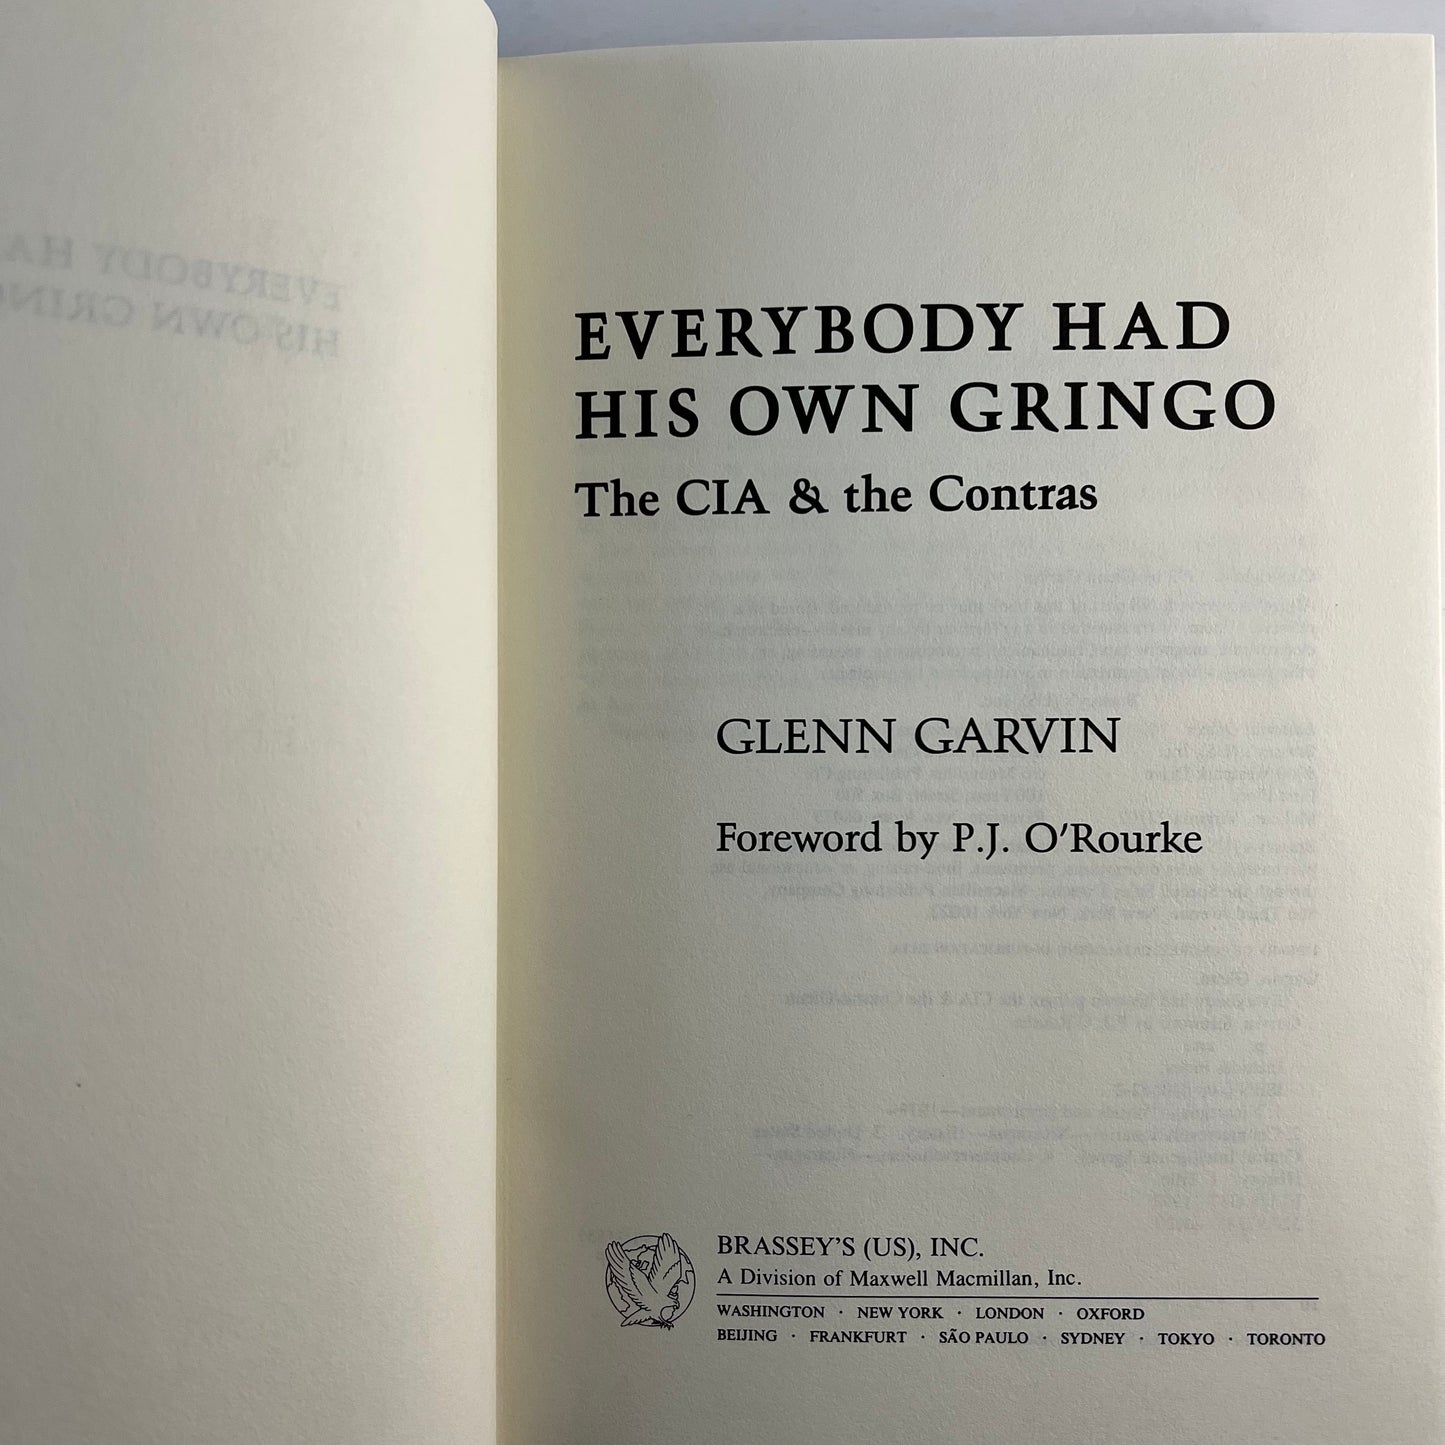 Everybody Had His Own Gringo: The CIA & the Contras